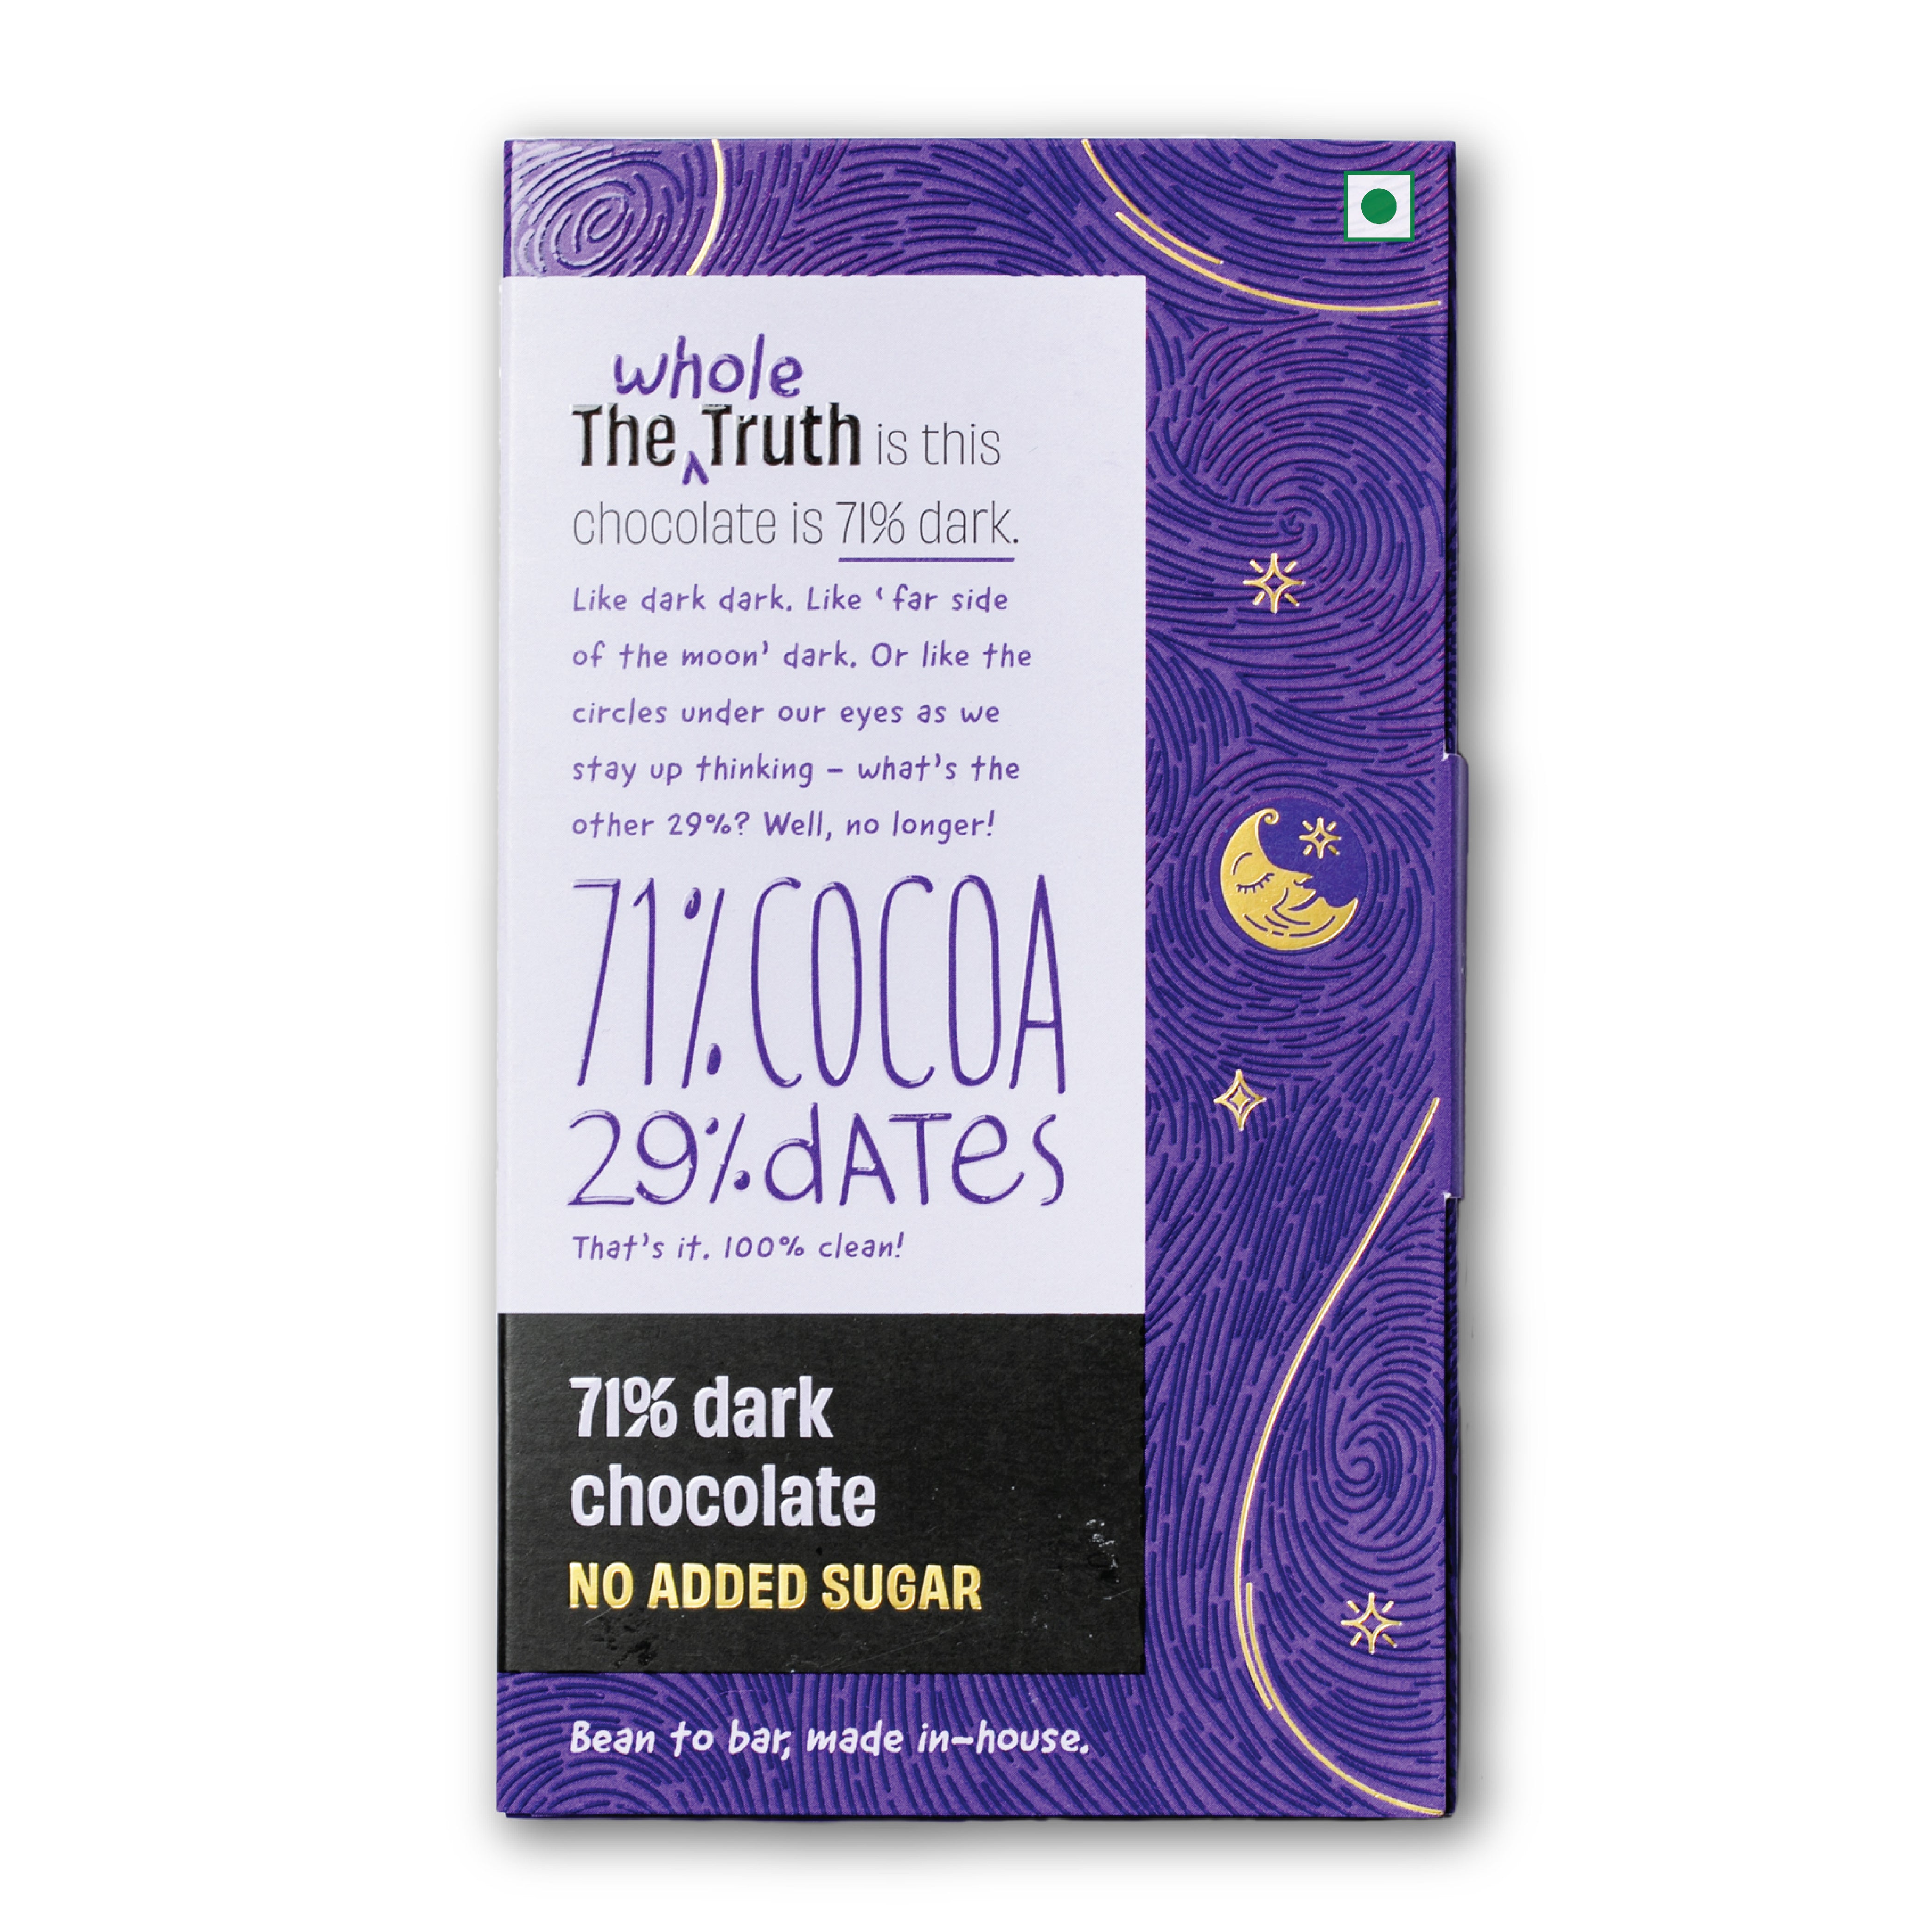 The Whole Truth - Dark Chocolate Combo | 71% Dark Chocolate | Pack of 3 | 160 g | No Added Sugar | Bean to Bar | 71% Cocoa 29% Dates